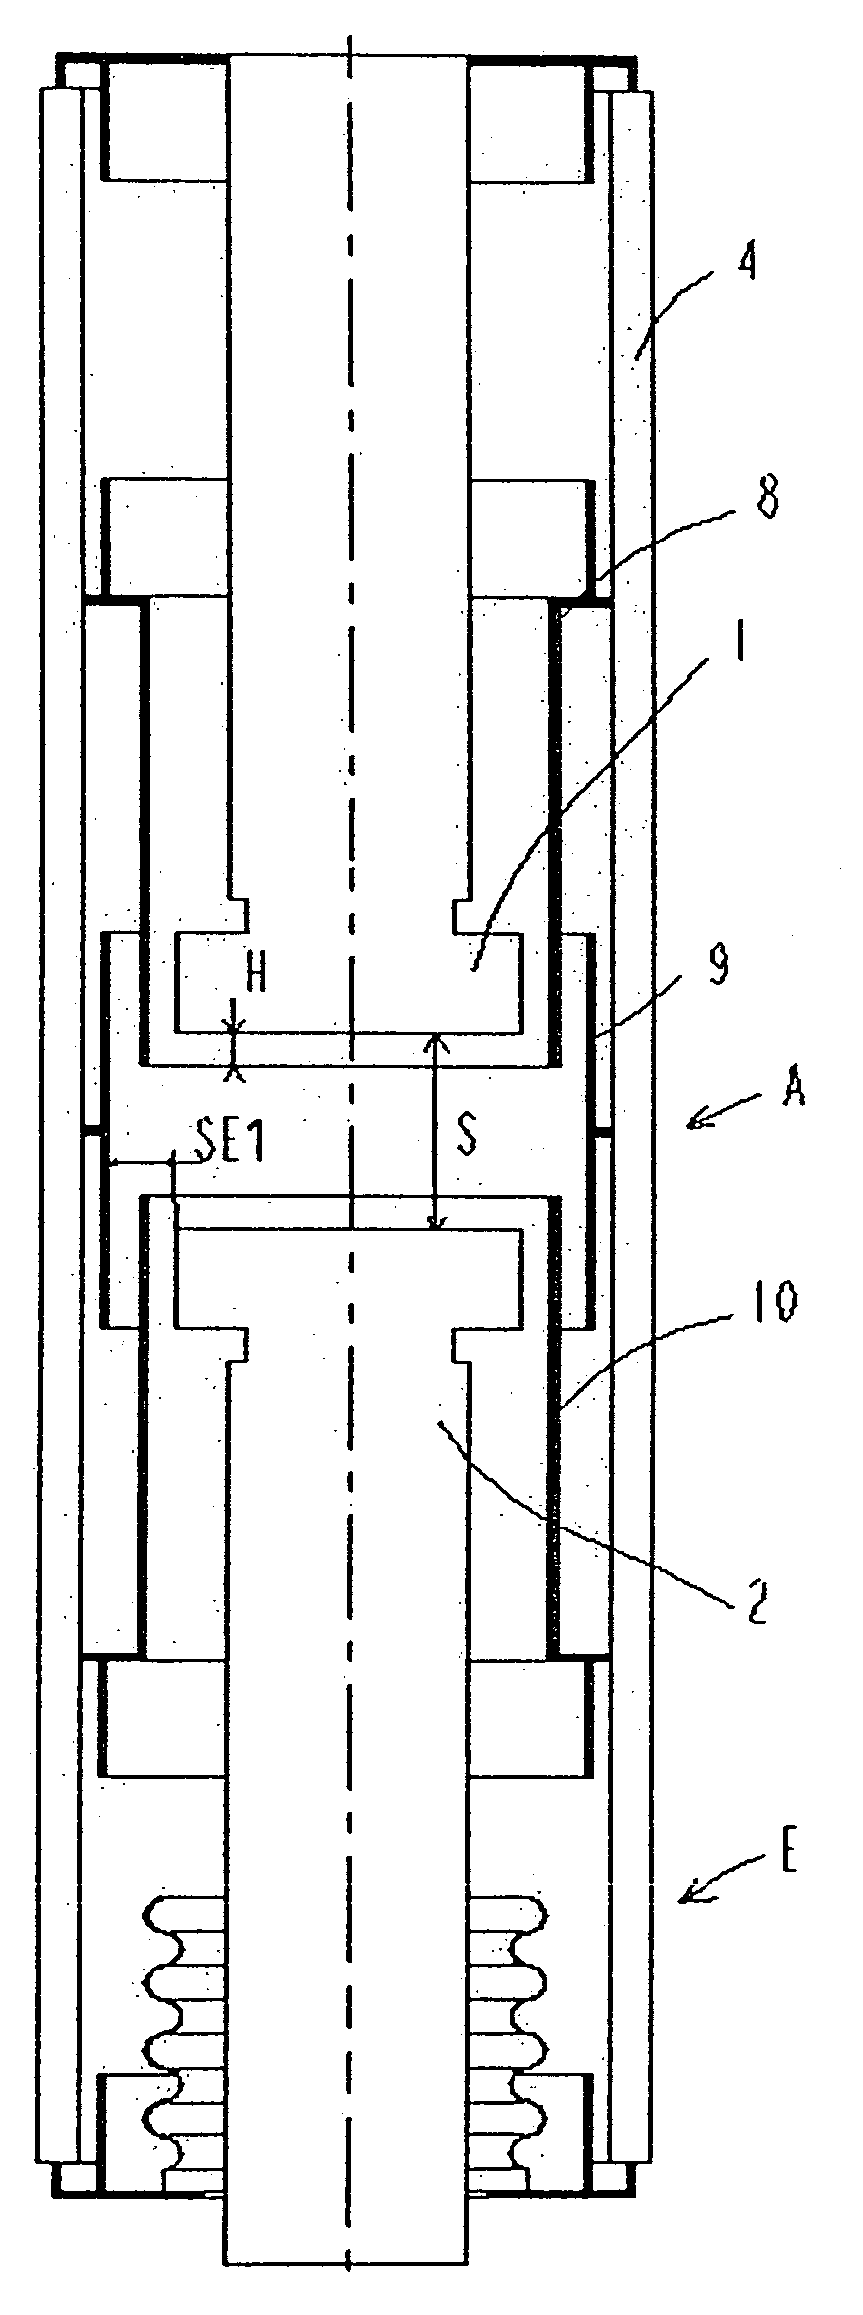 Vacuum cartridge for an electrical protection apparatus such as a switch or a circuit breaker